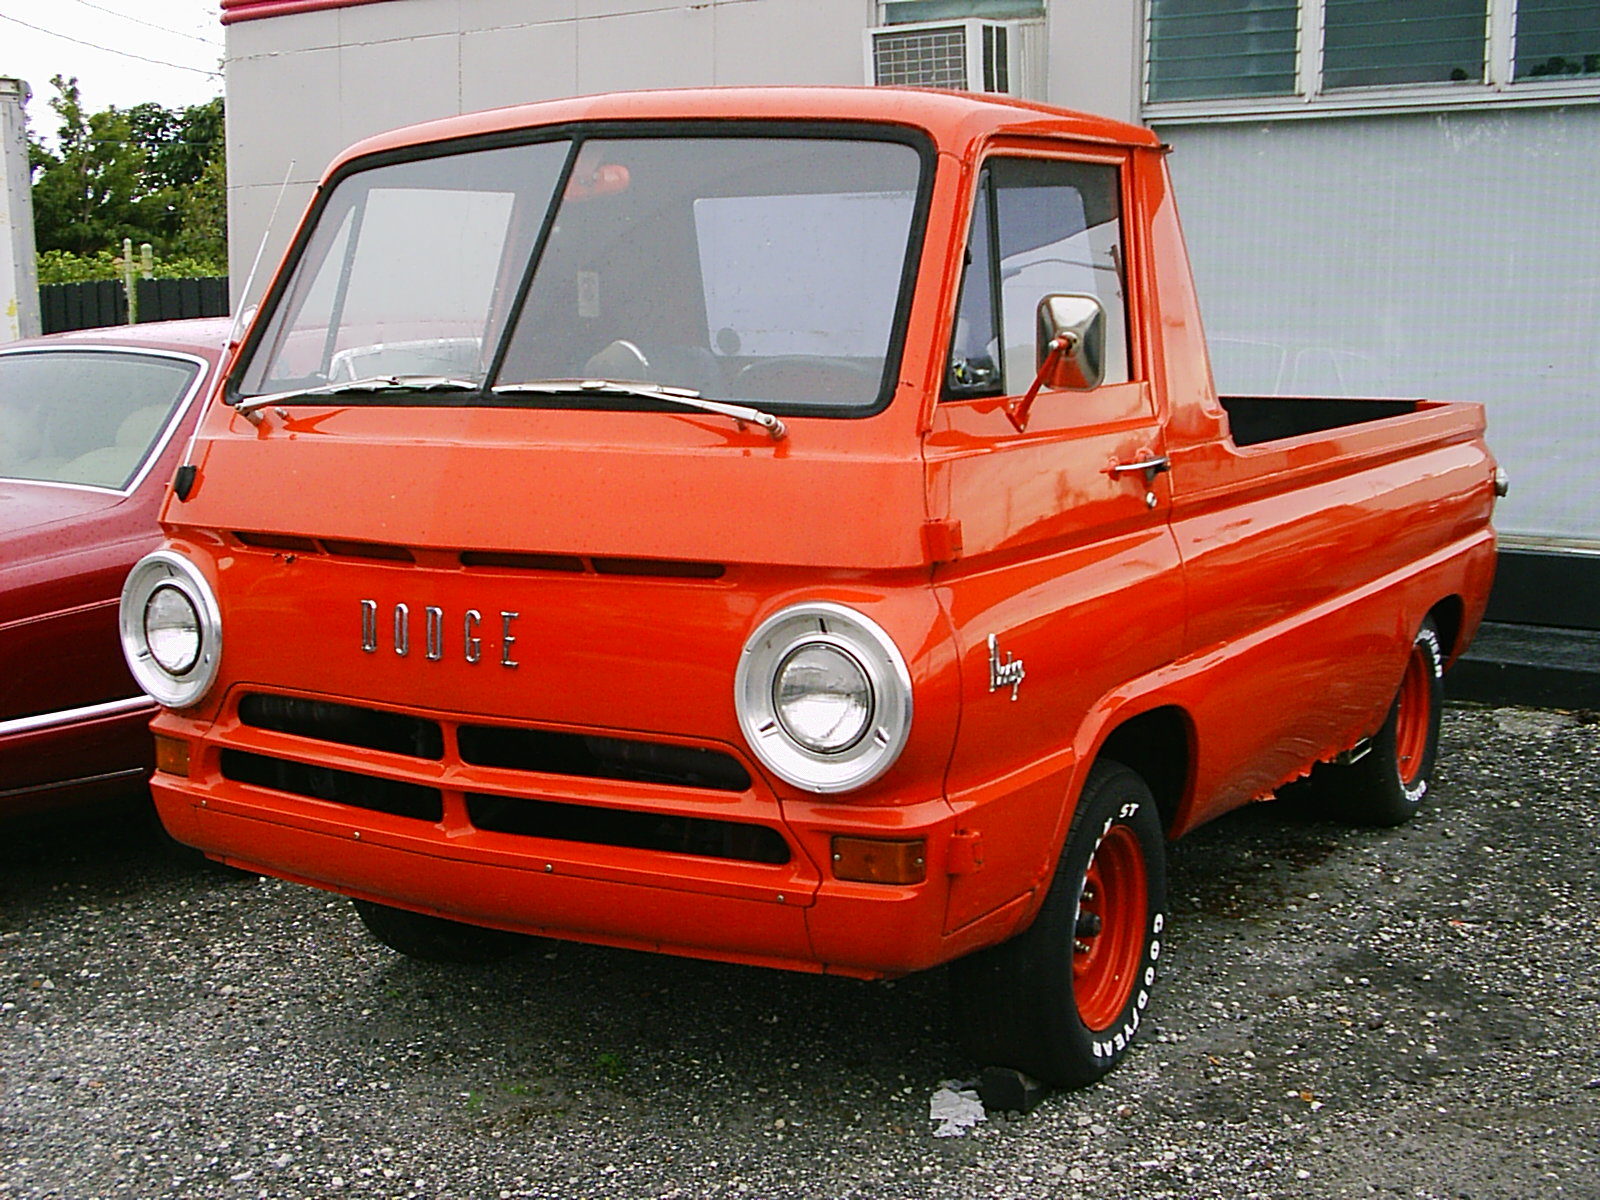 Re: 1966 Dodge A-100 pickup. jpage, Thanks for the info.